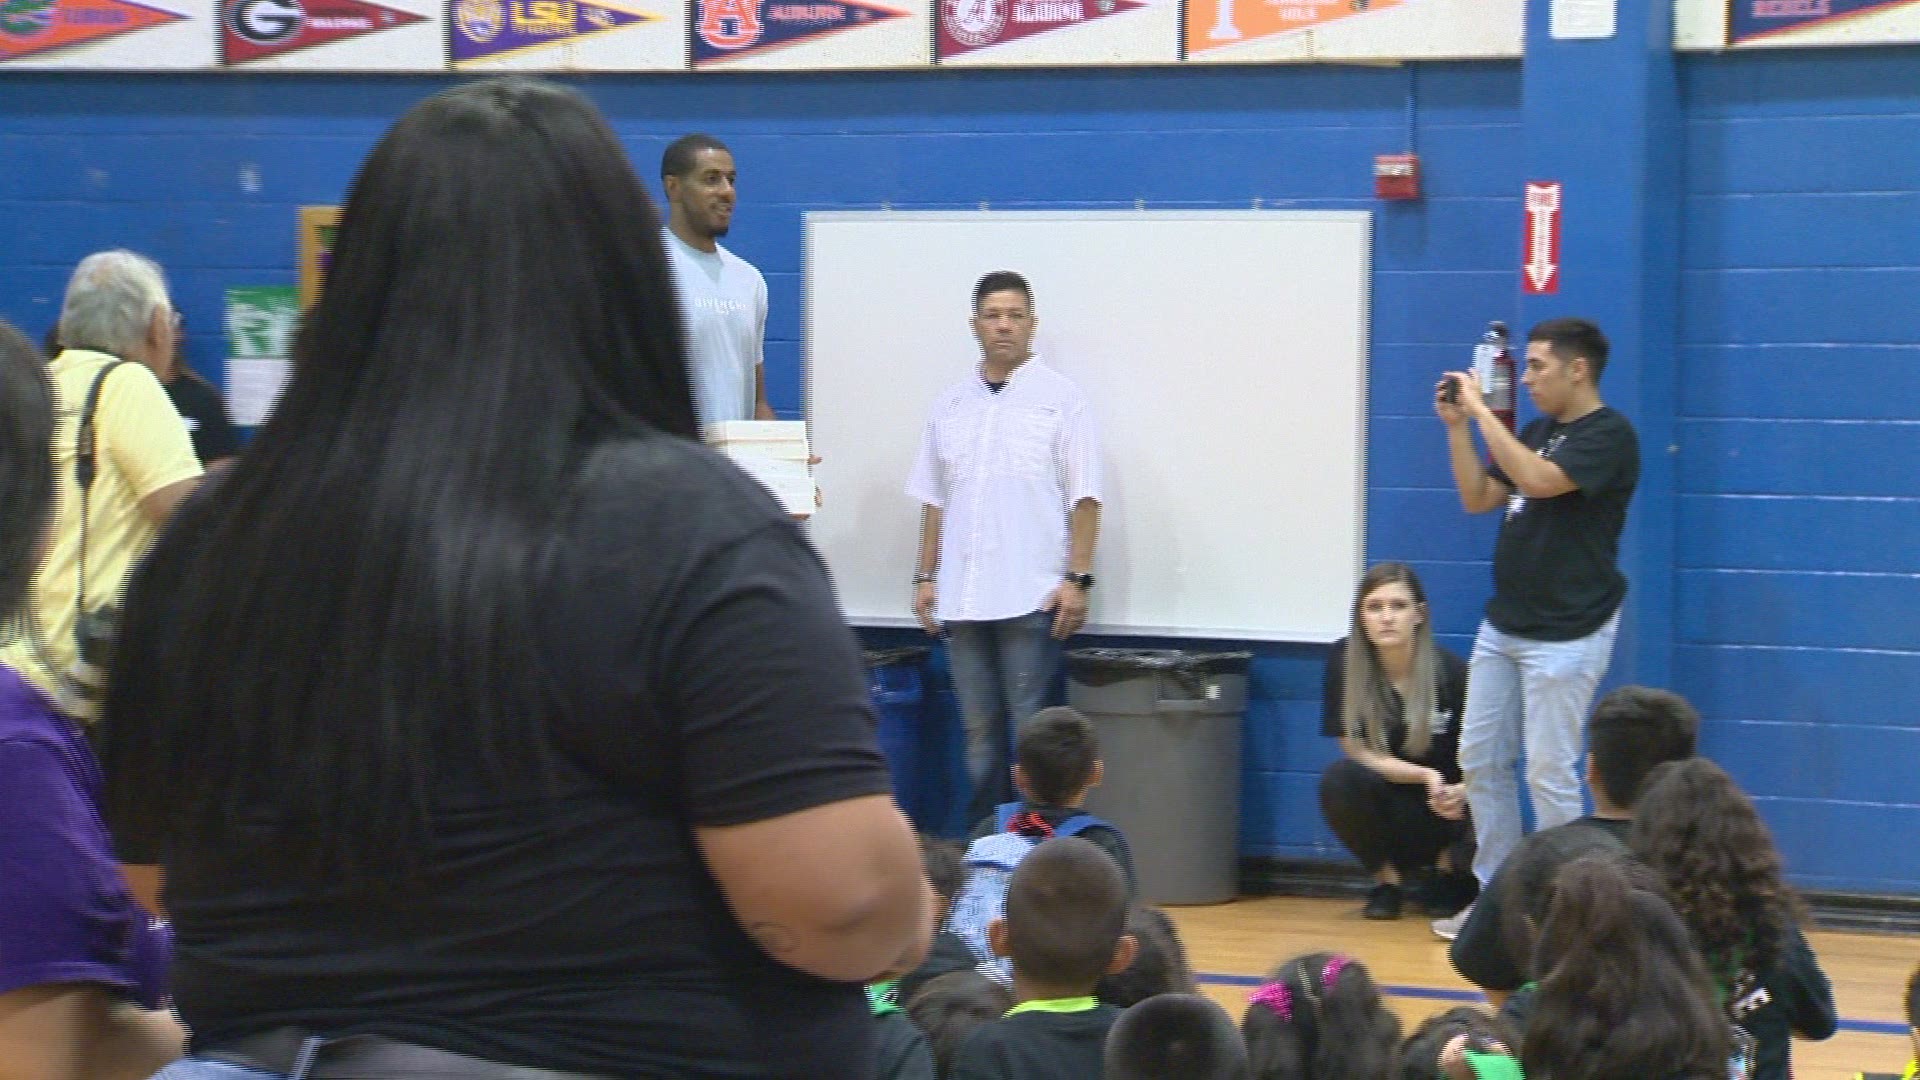 The Boys and Girls Club of San Antonio got a special visitor and a day they'll never forget.